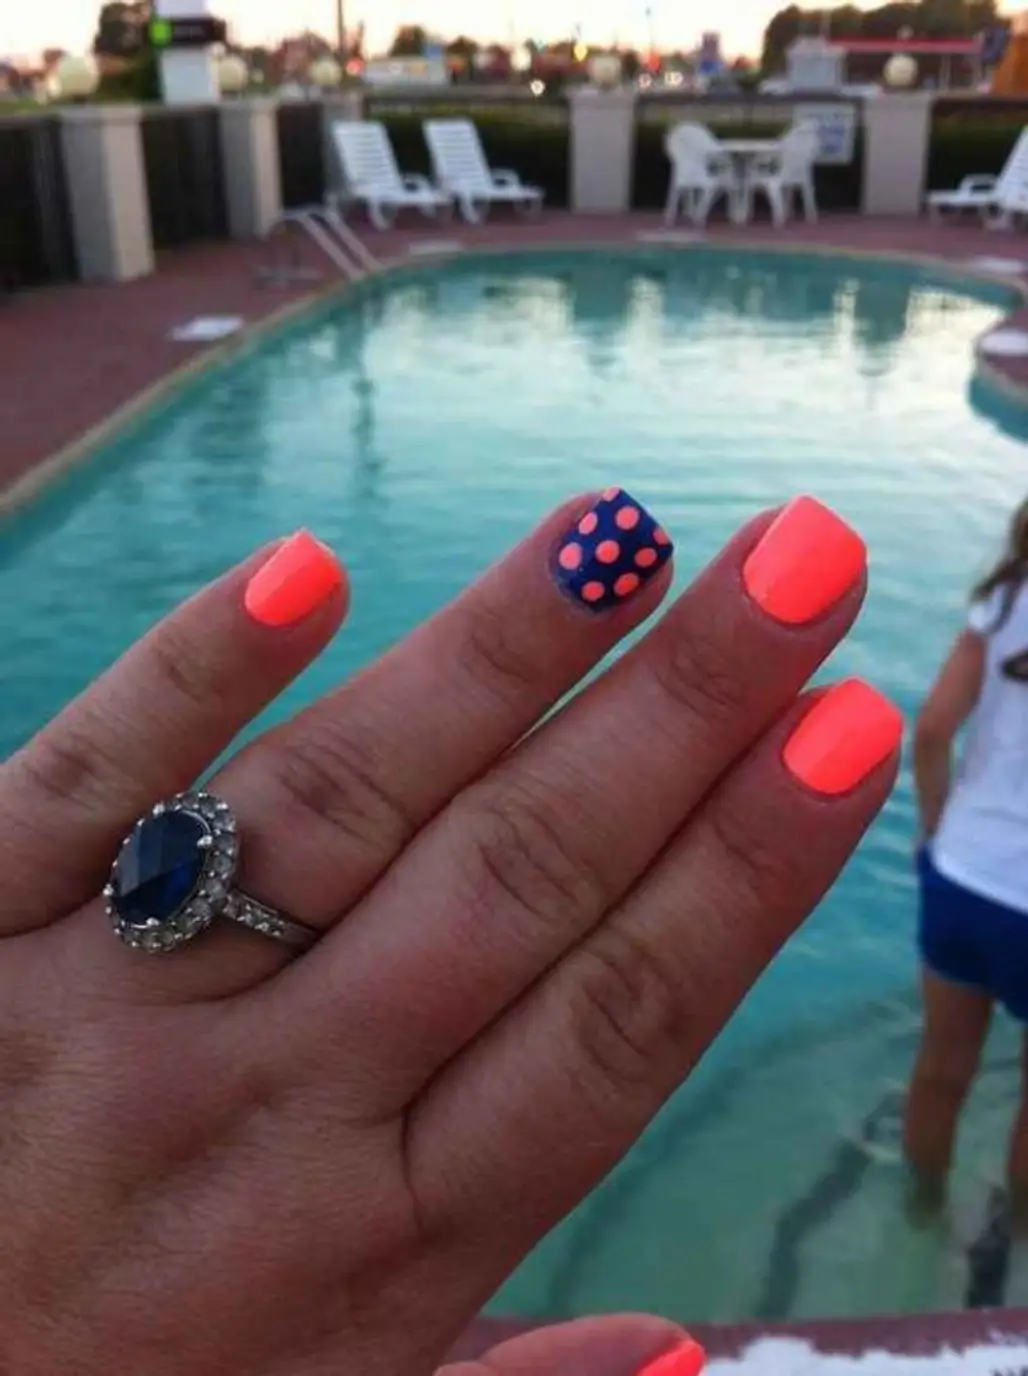 Here Are the Coolest 38 Polka Dot Nail Art Patterns in the World ...